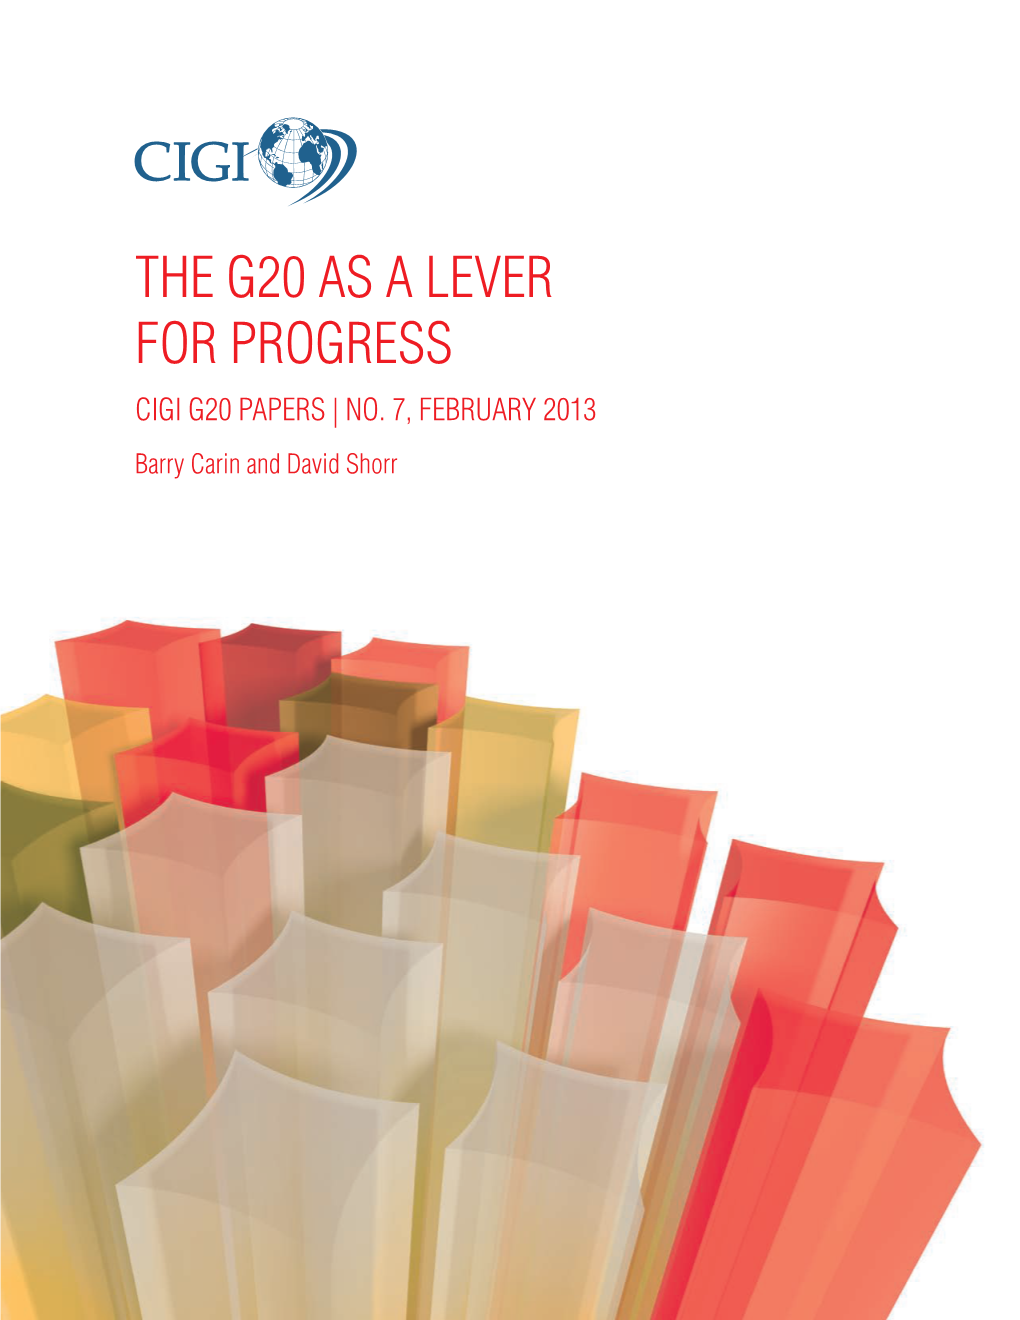 The G20 As a Lever for Progress CIGI G20 Papers | No